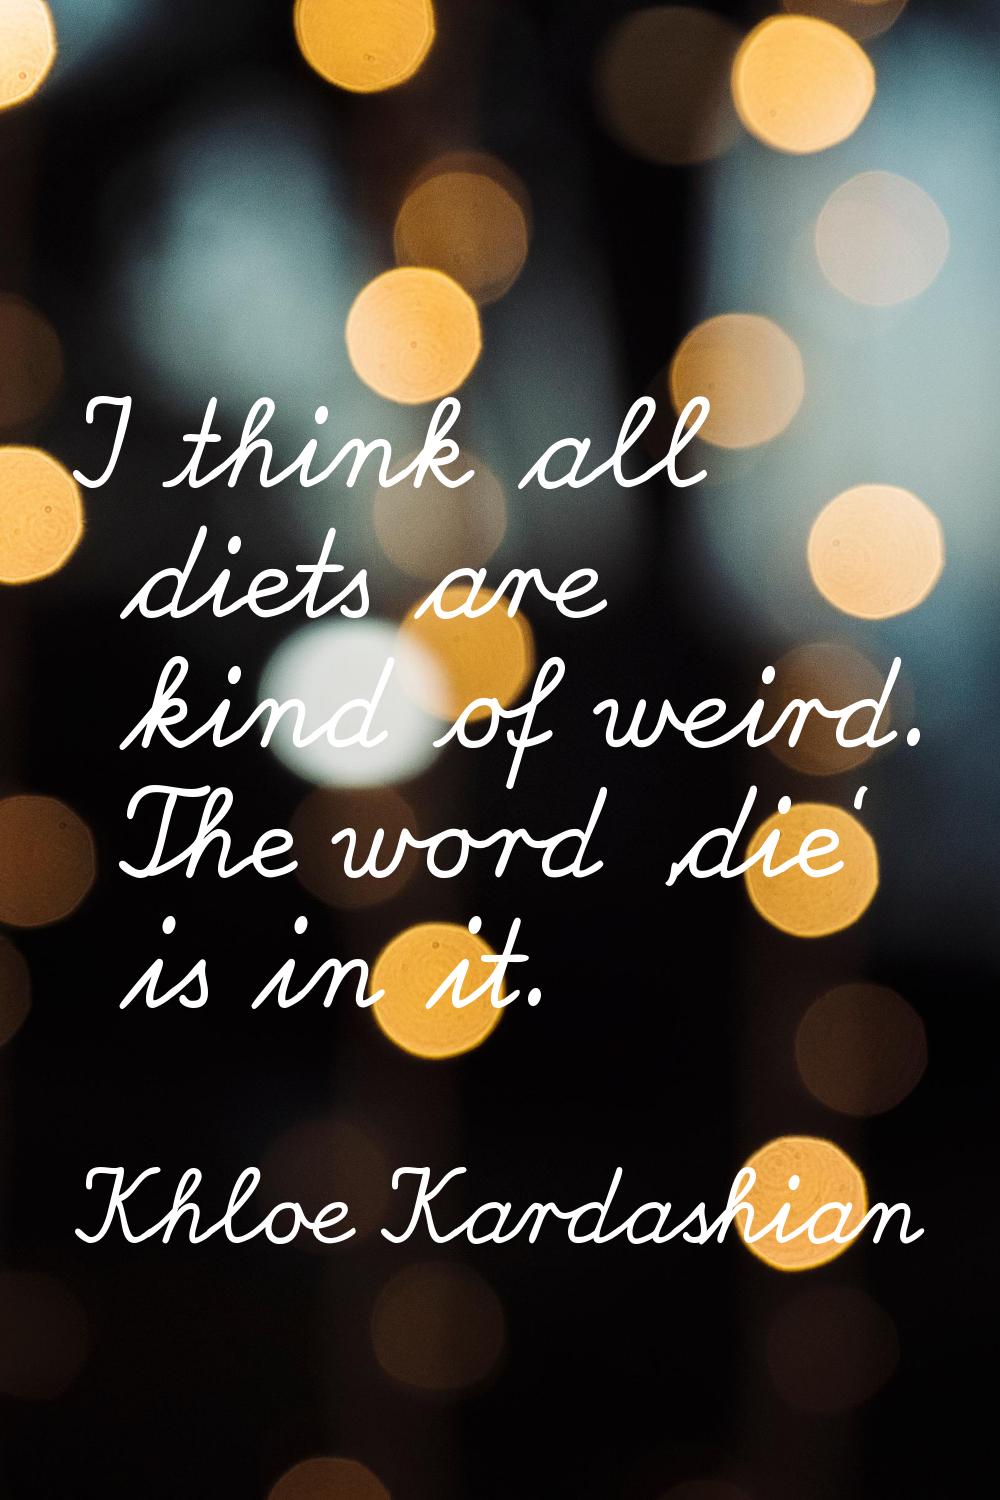 I think all diets are kind of weird. The word 'die' is in it.